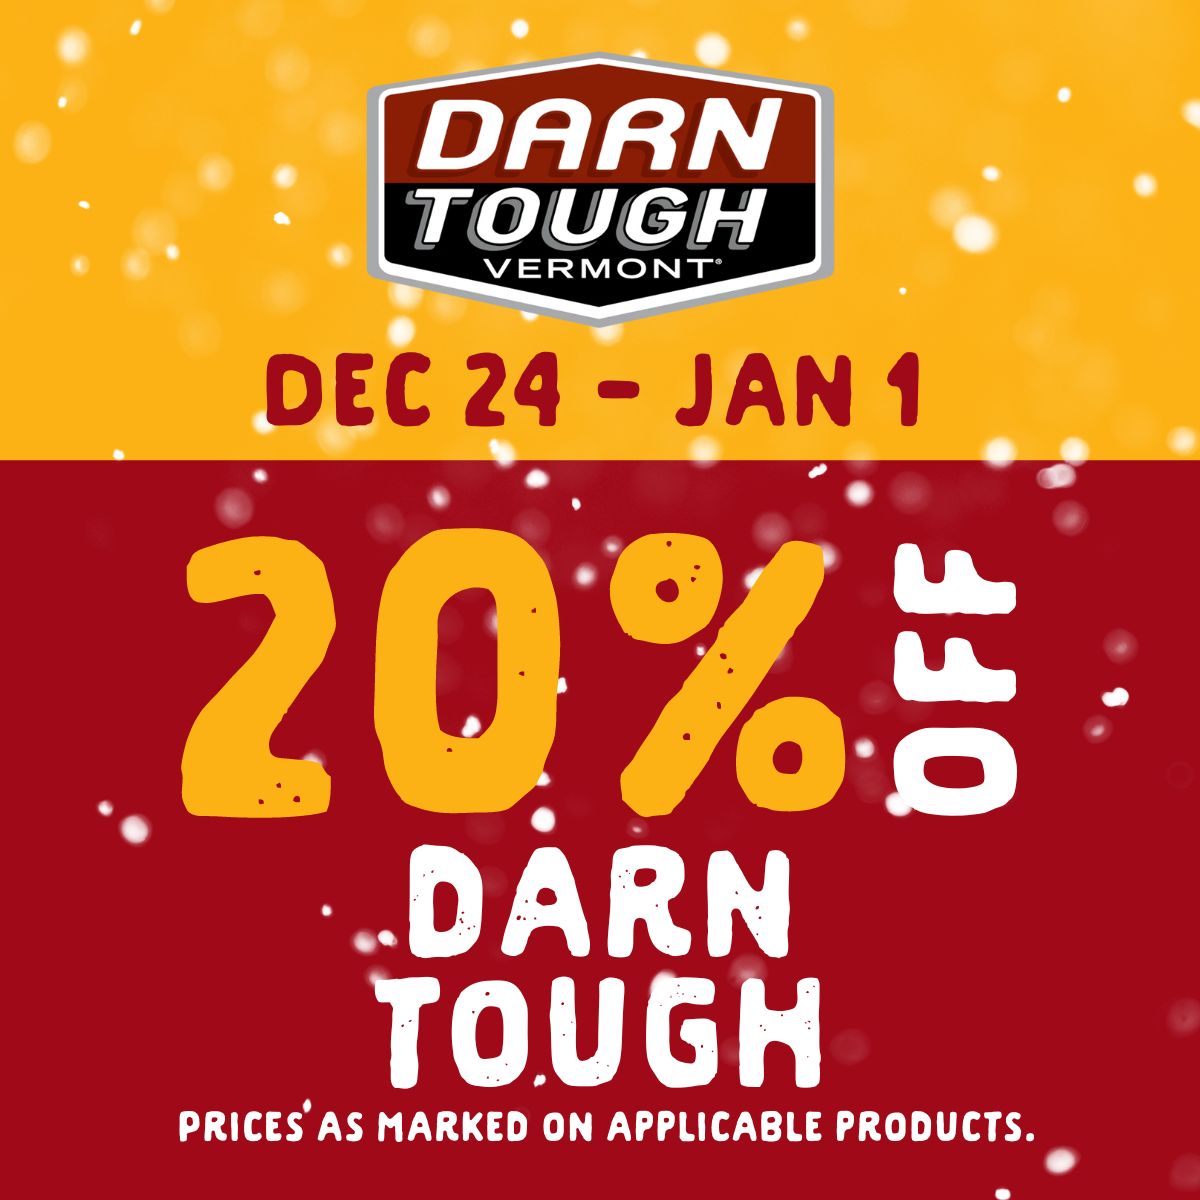 20% off Darn Tough from December 24 until January 1. Prices as marked on applicable products.